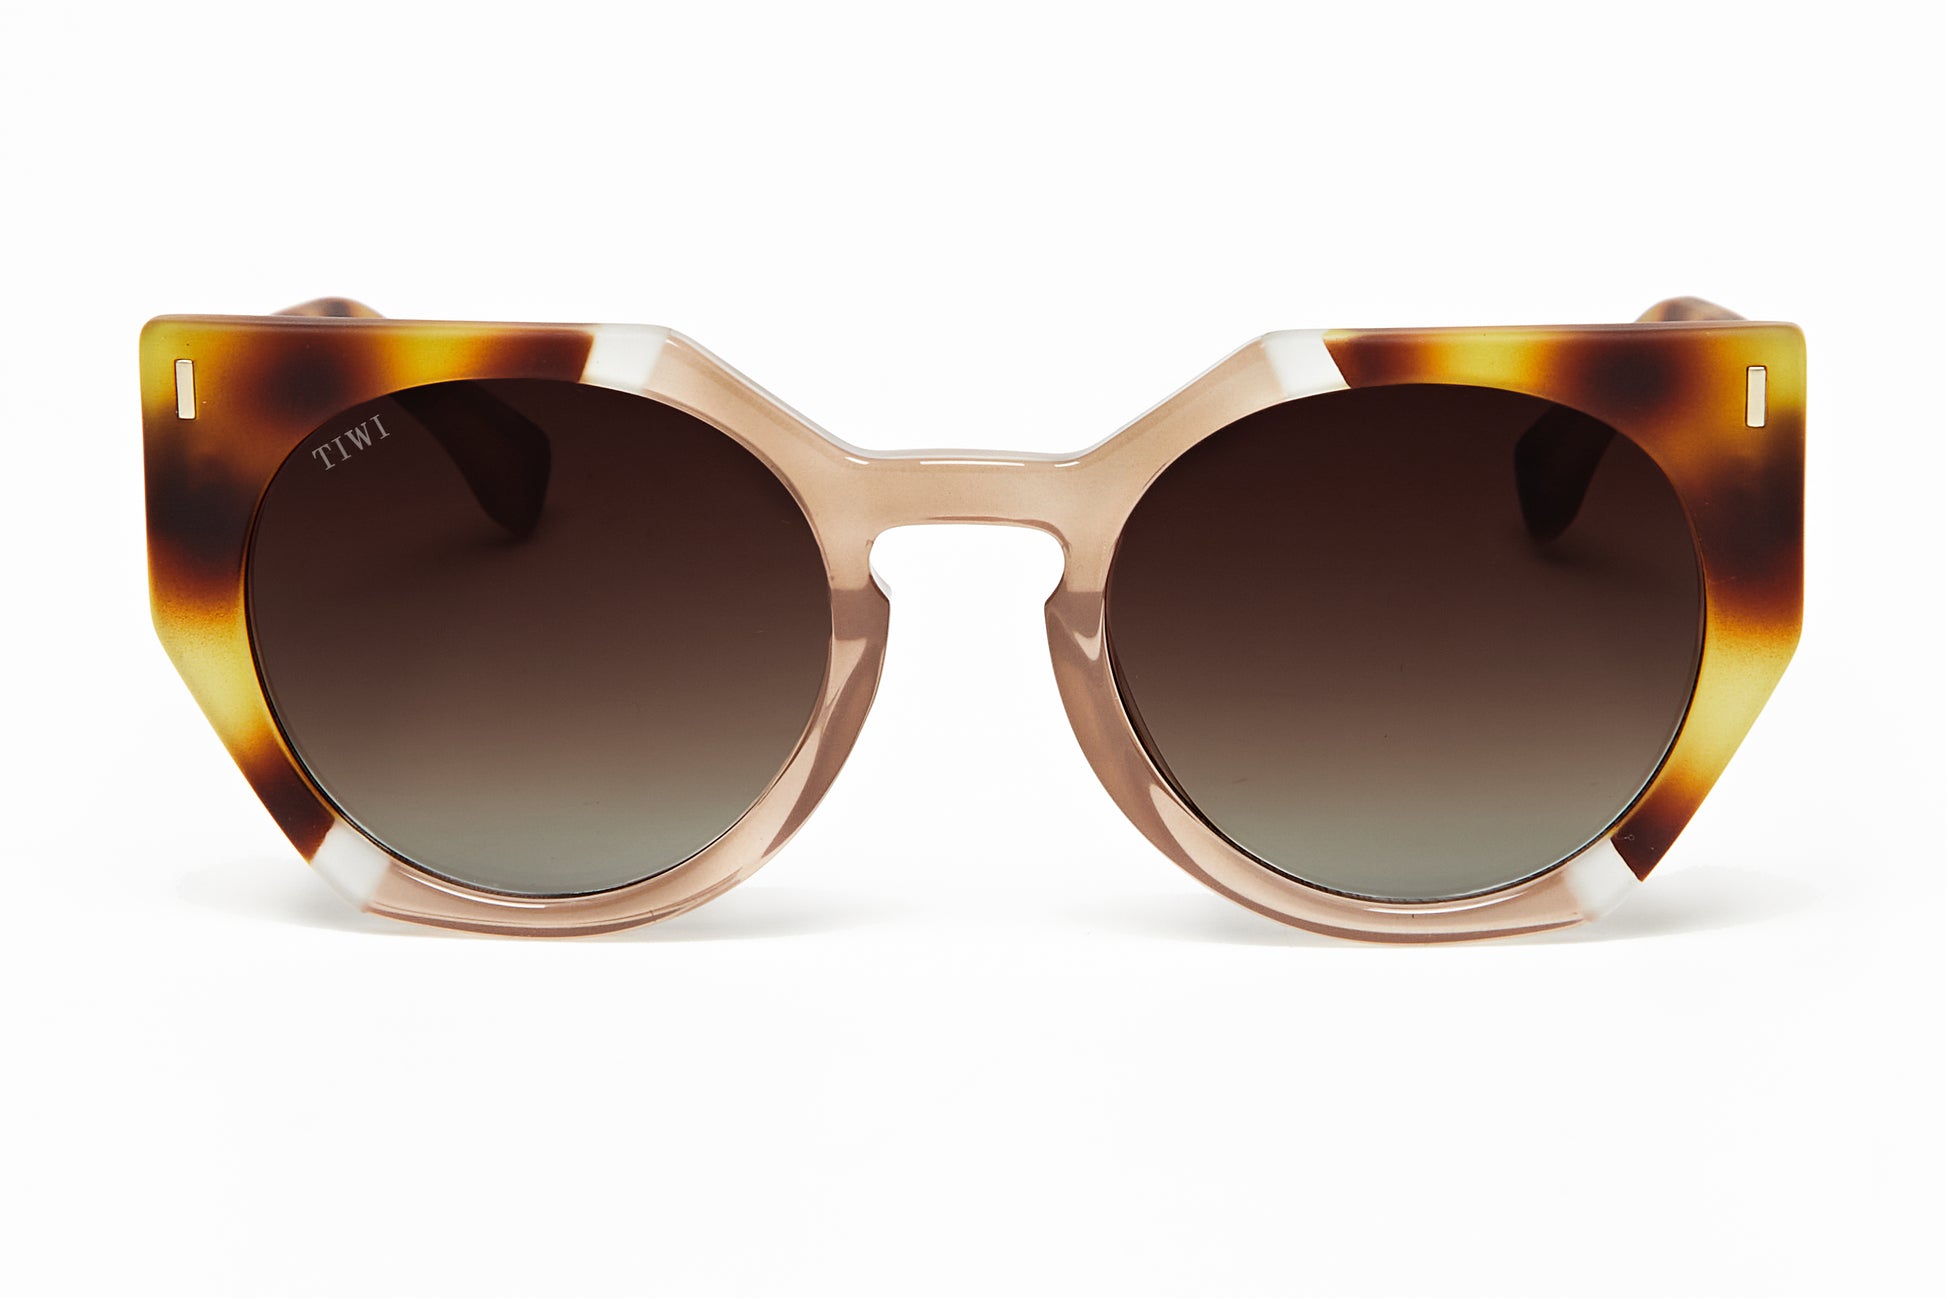 VENUS Sunglasses Available in more colors Tricolor Havana/Ice/Coconut with Brown Gradient Lenses  